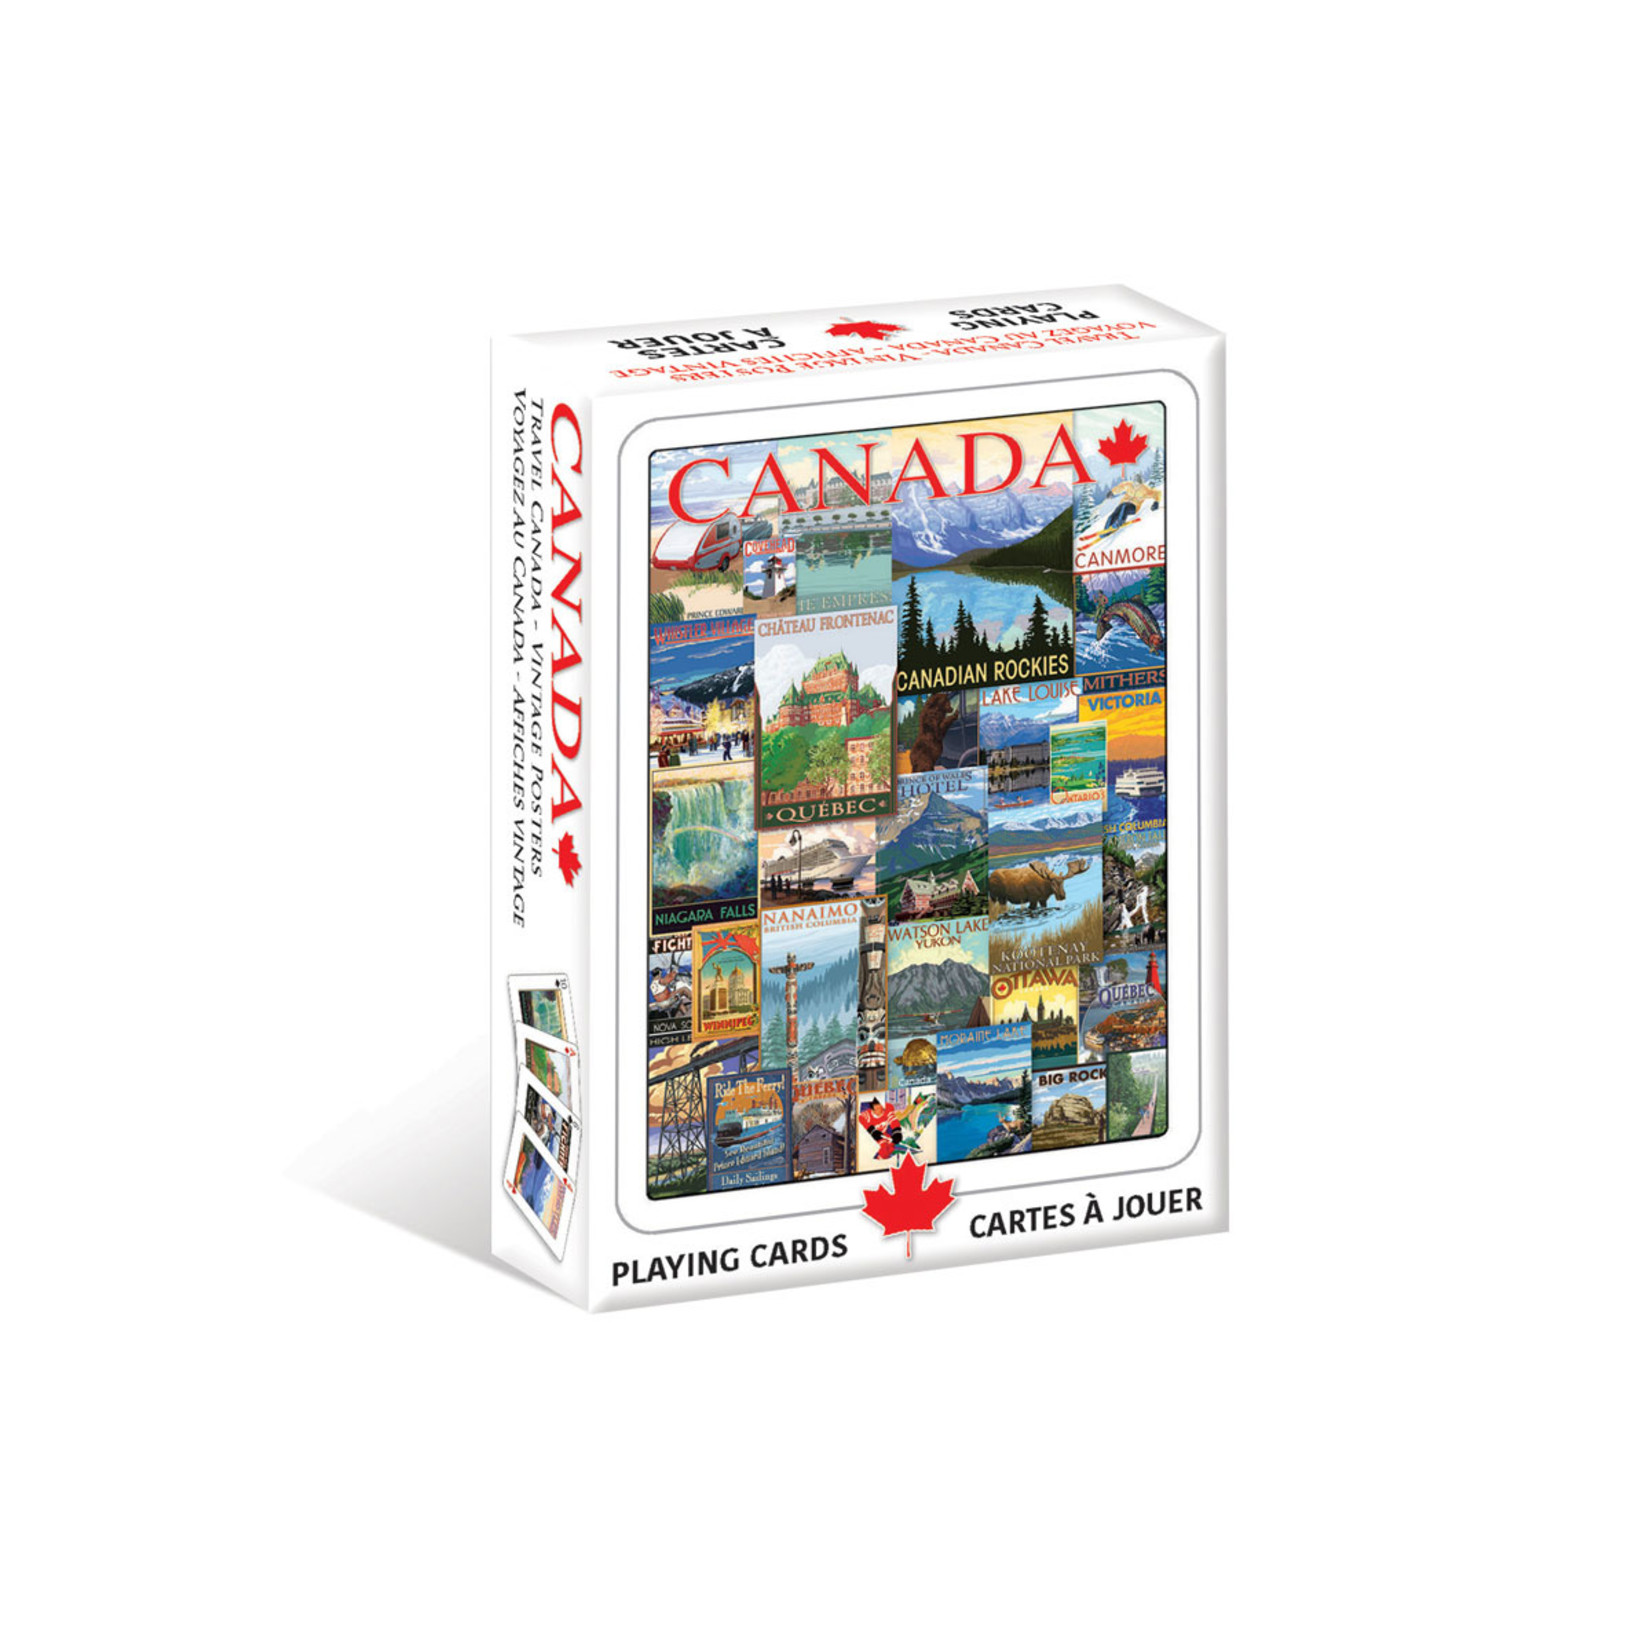 Playing Cards - Travel Canada Posters